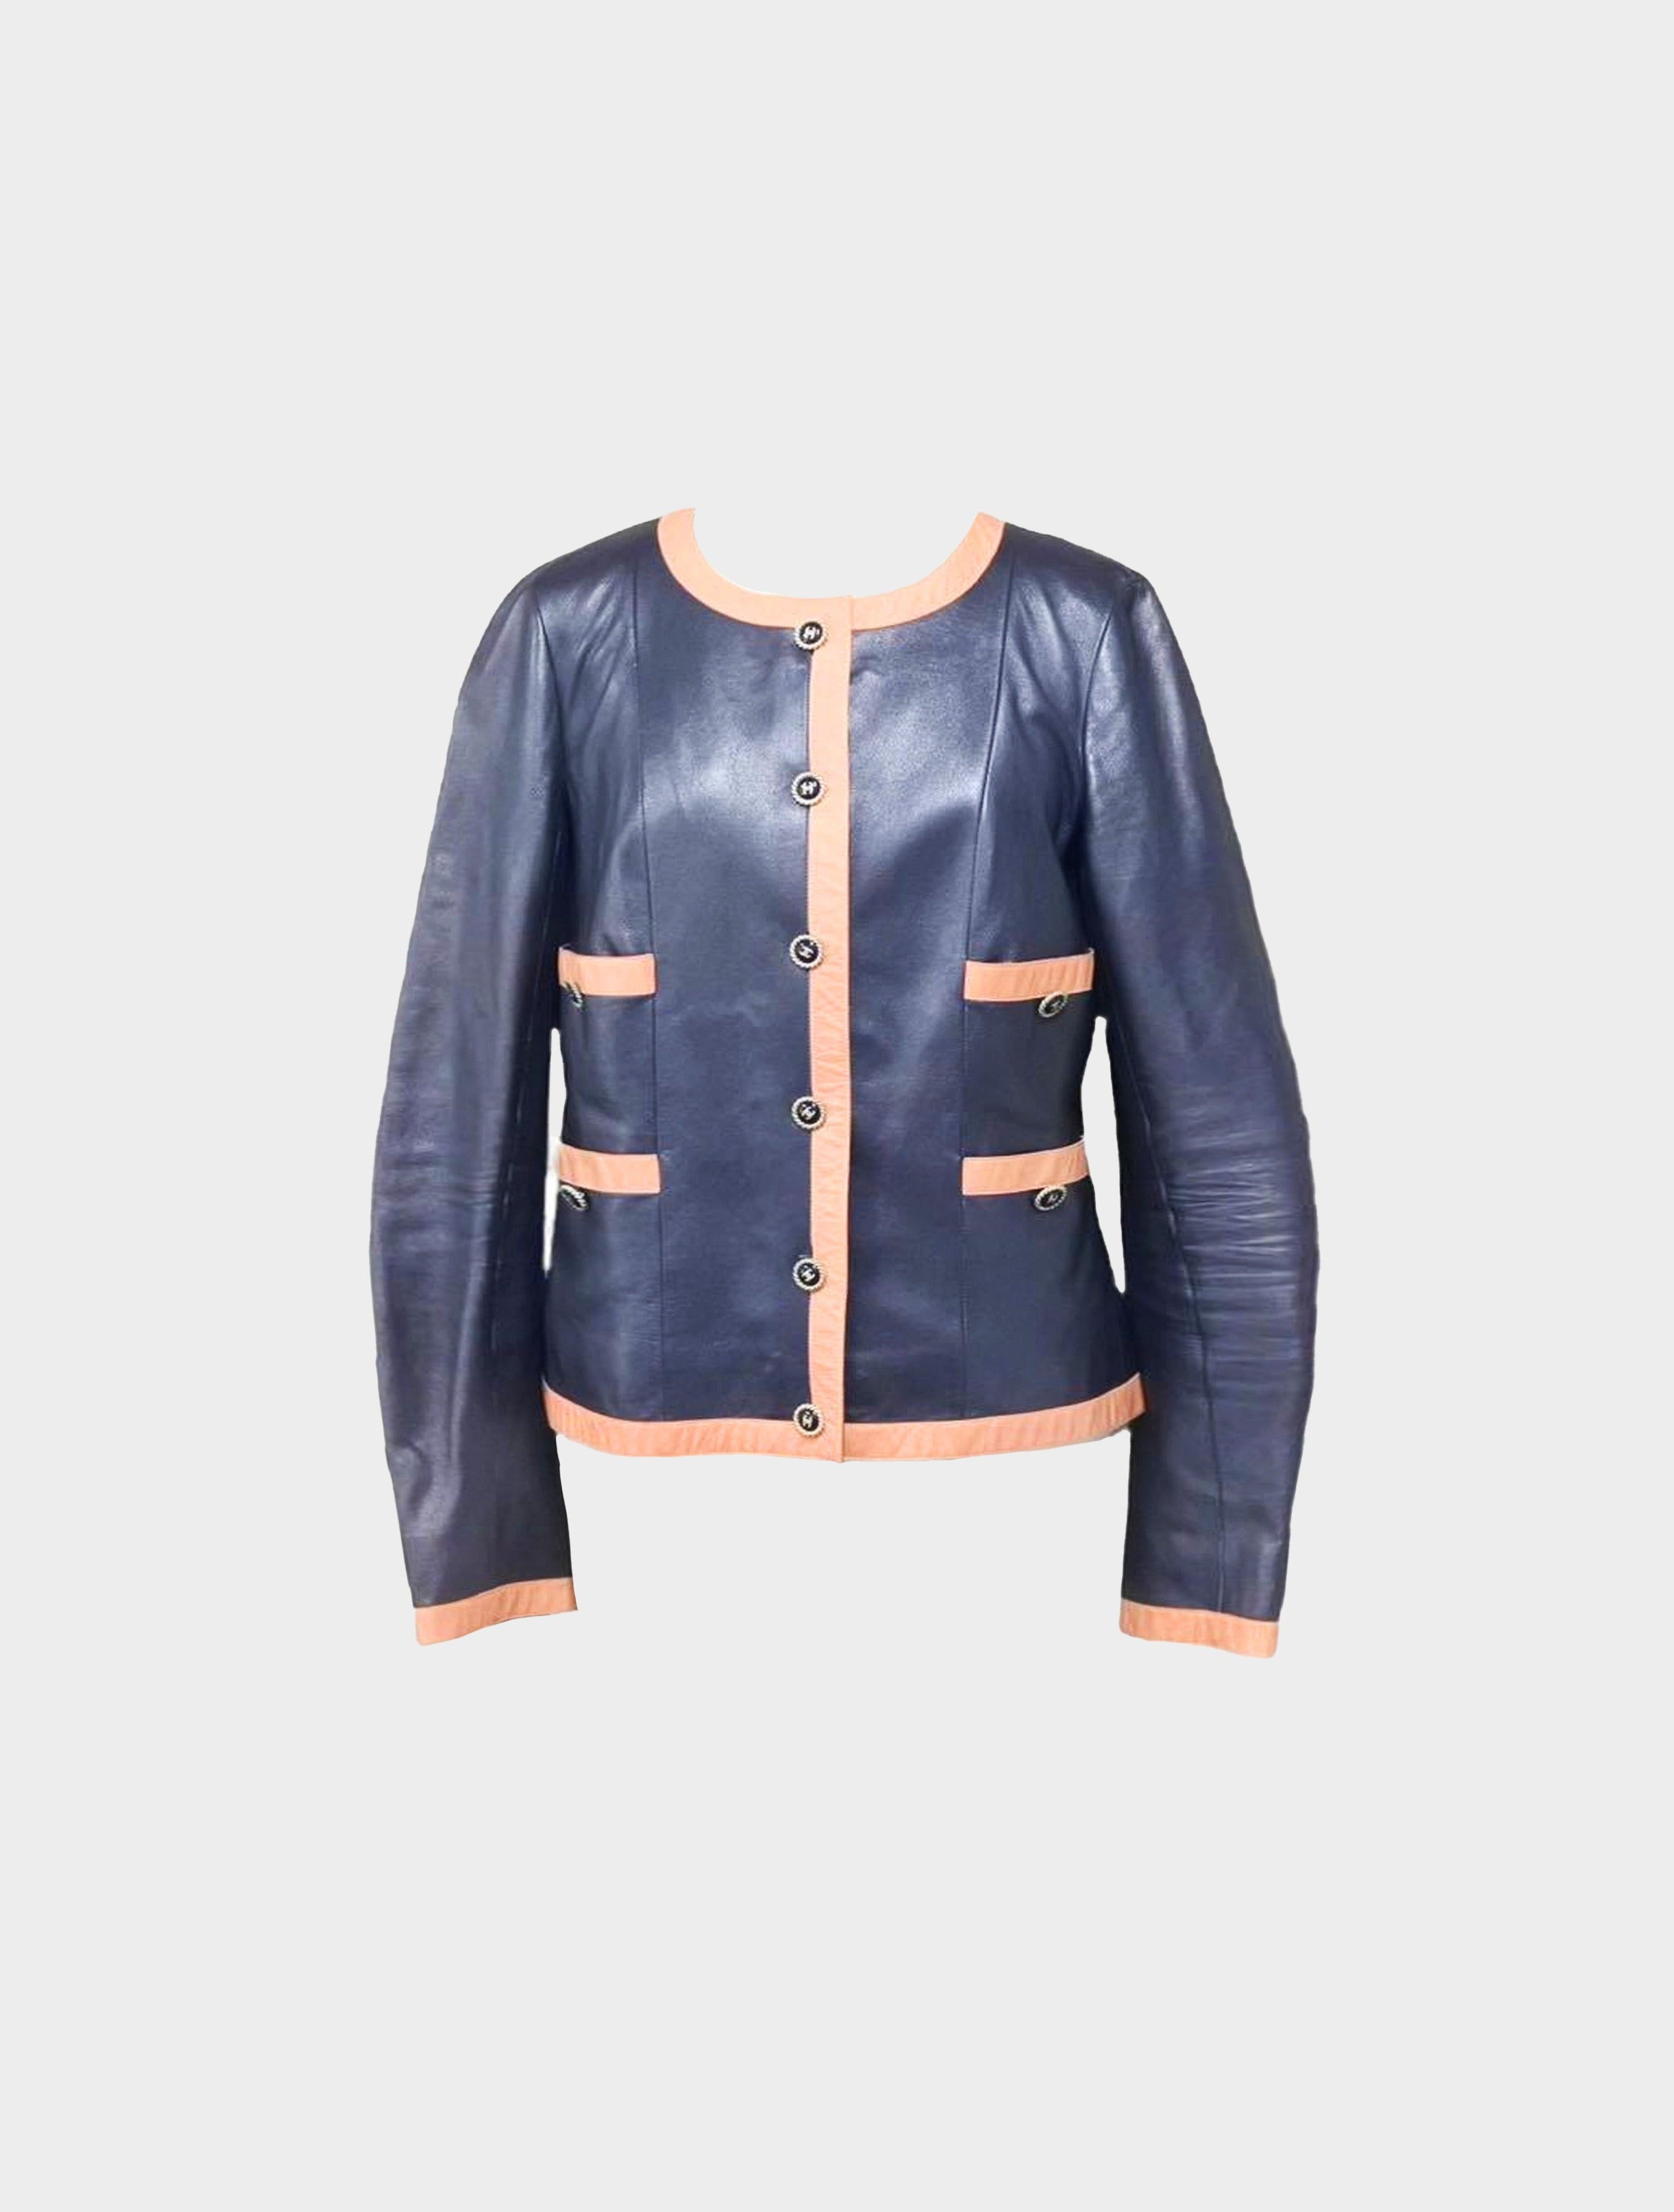 Chanel Spring 2007 Navy and Pink Leather Jacket · INTO